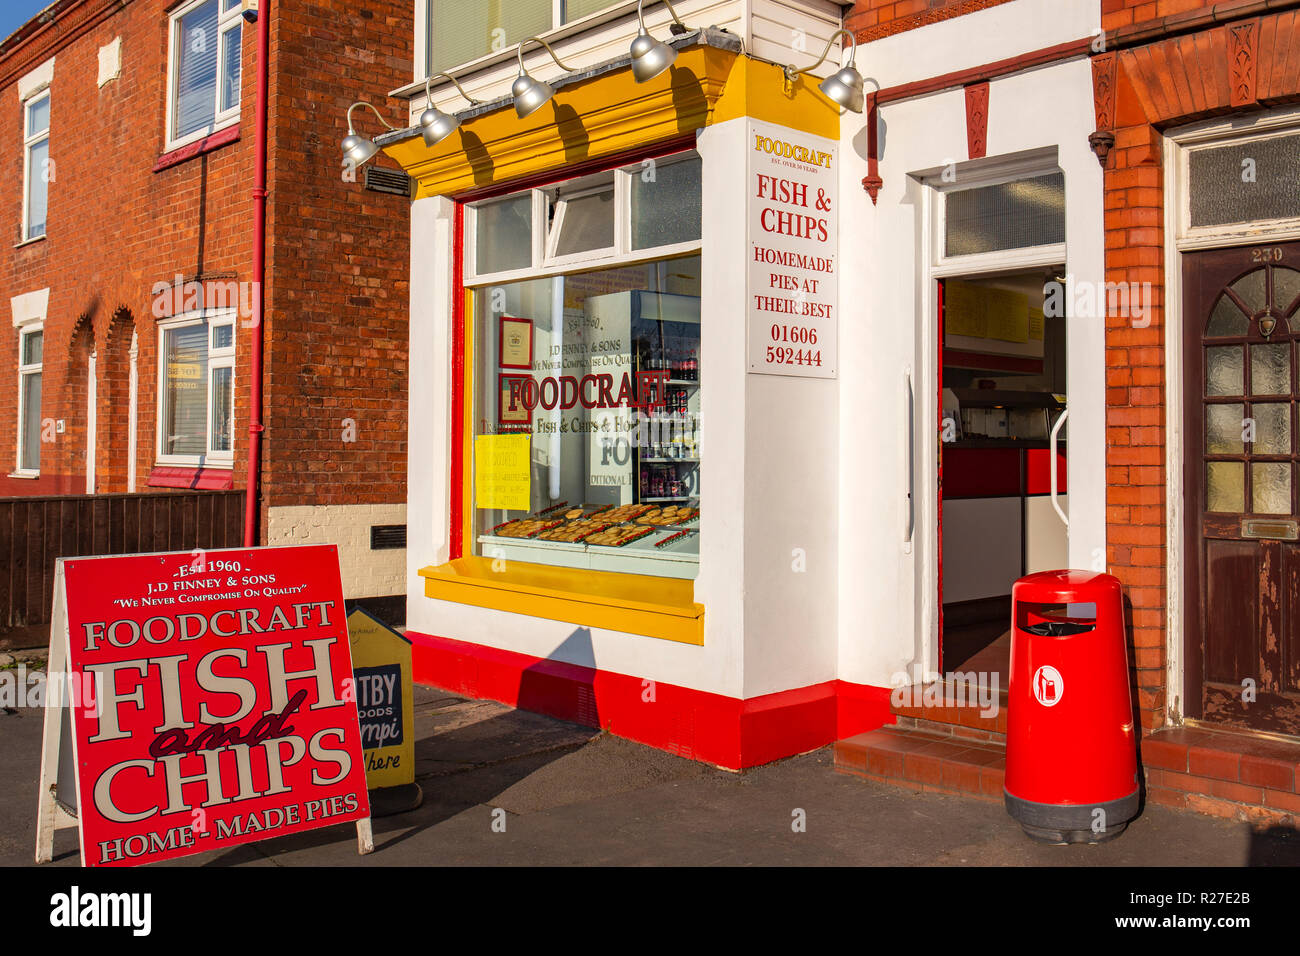 Foodcraft fish and chips shop in Winsford Cheshire UK Stock Photo